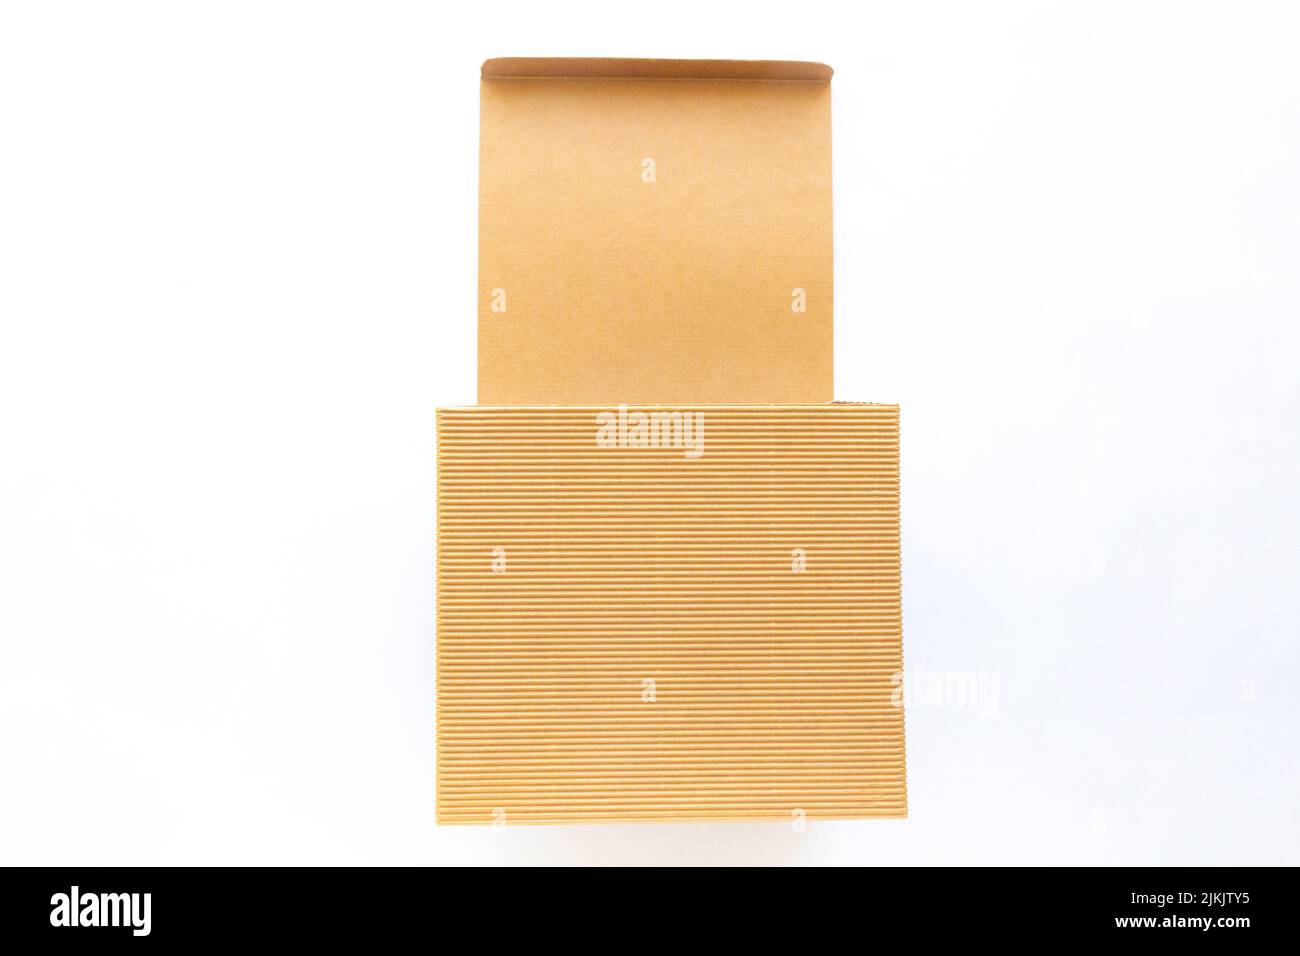 An open brown corrugated kraft cardboard box isolated on white background. Stock Photo